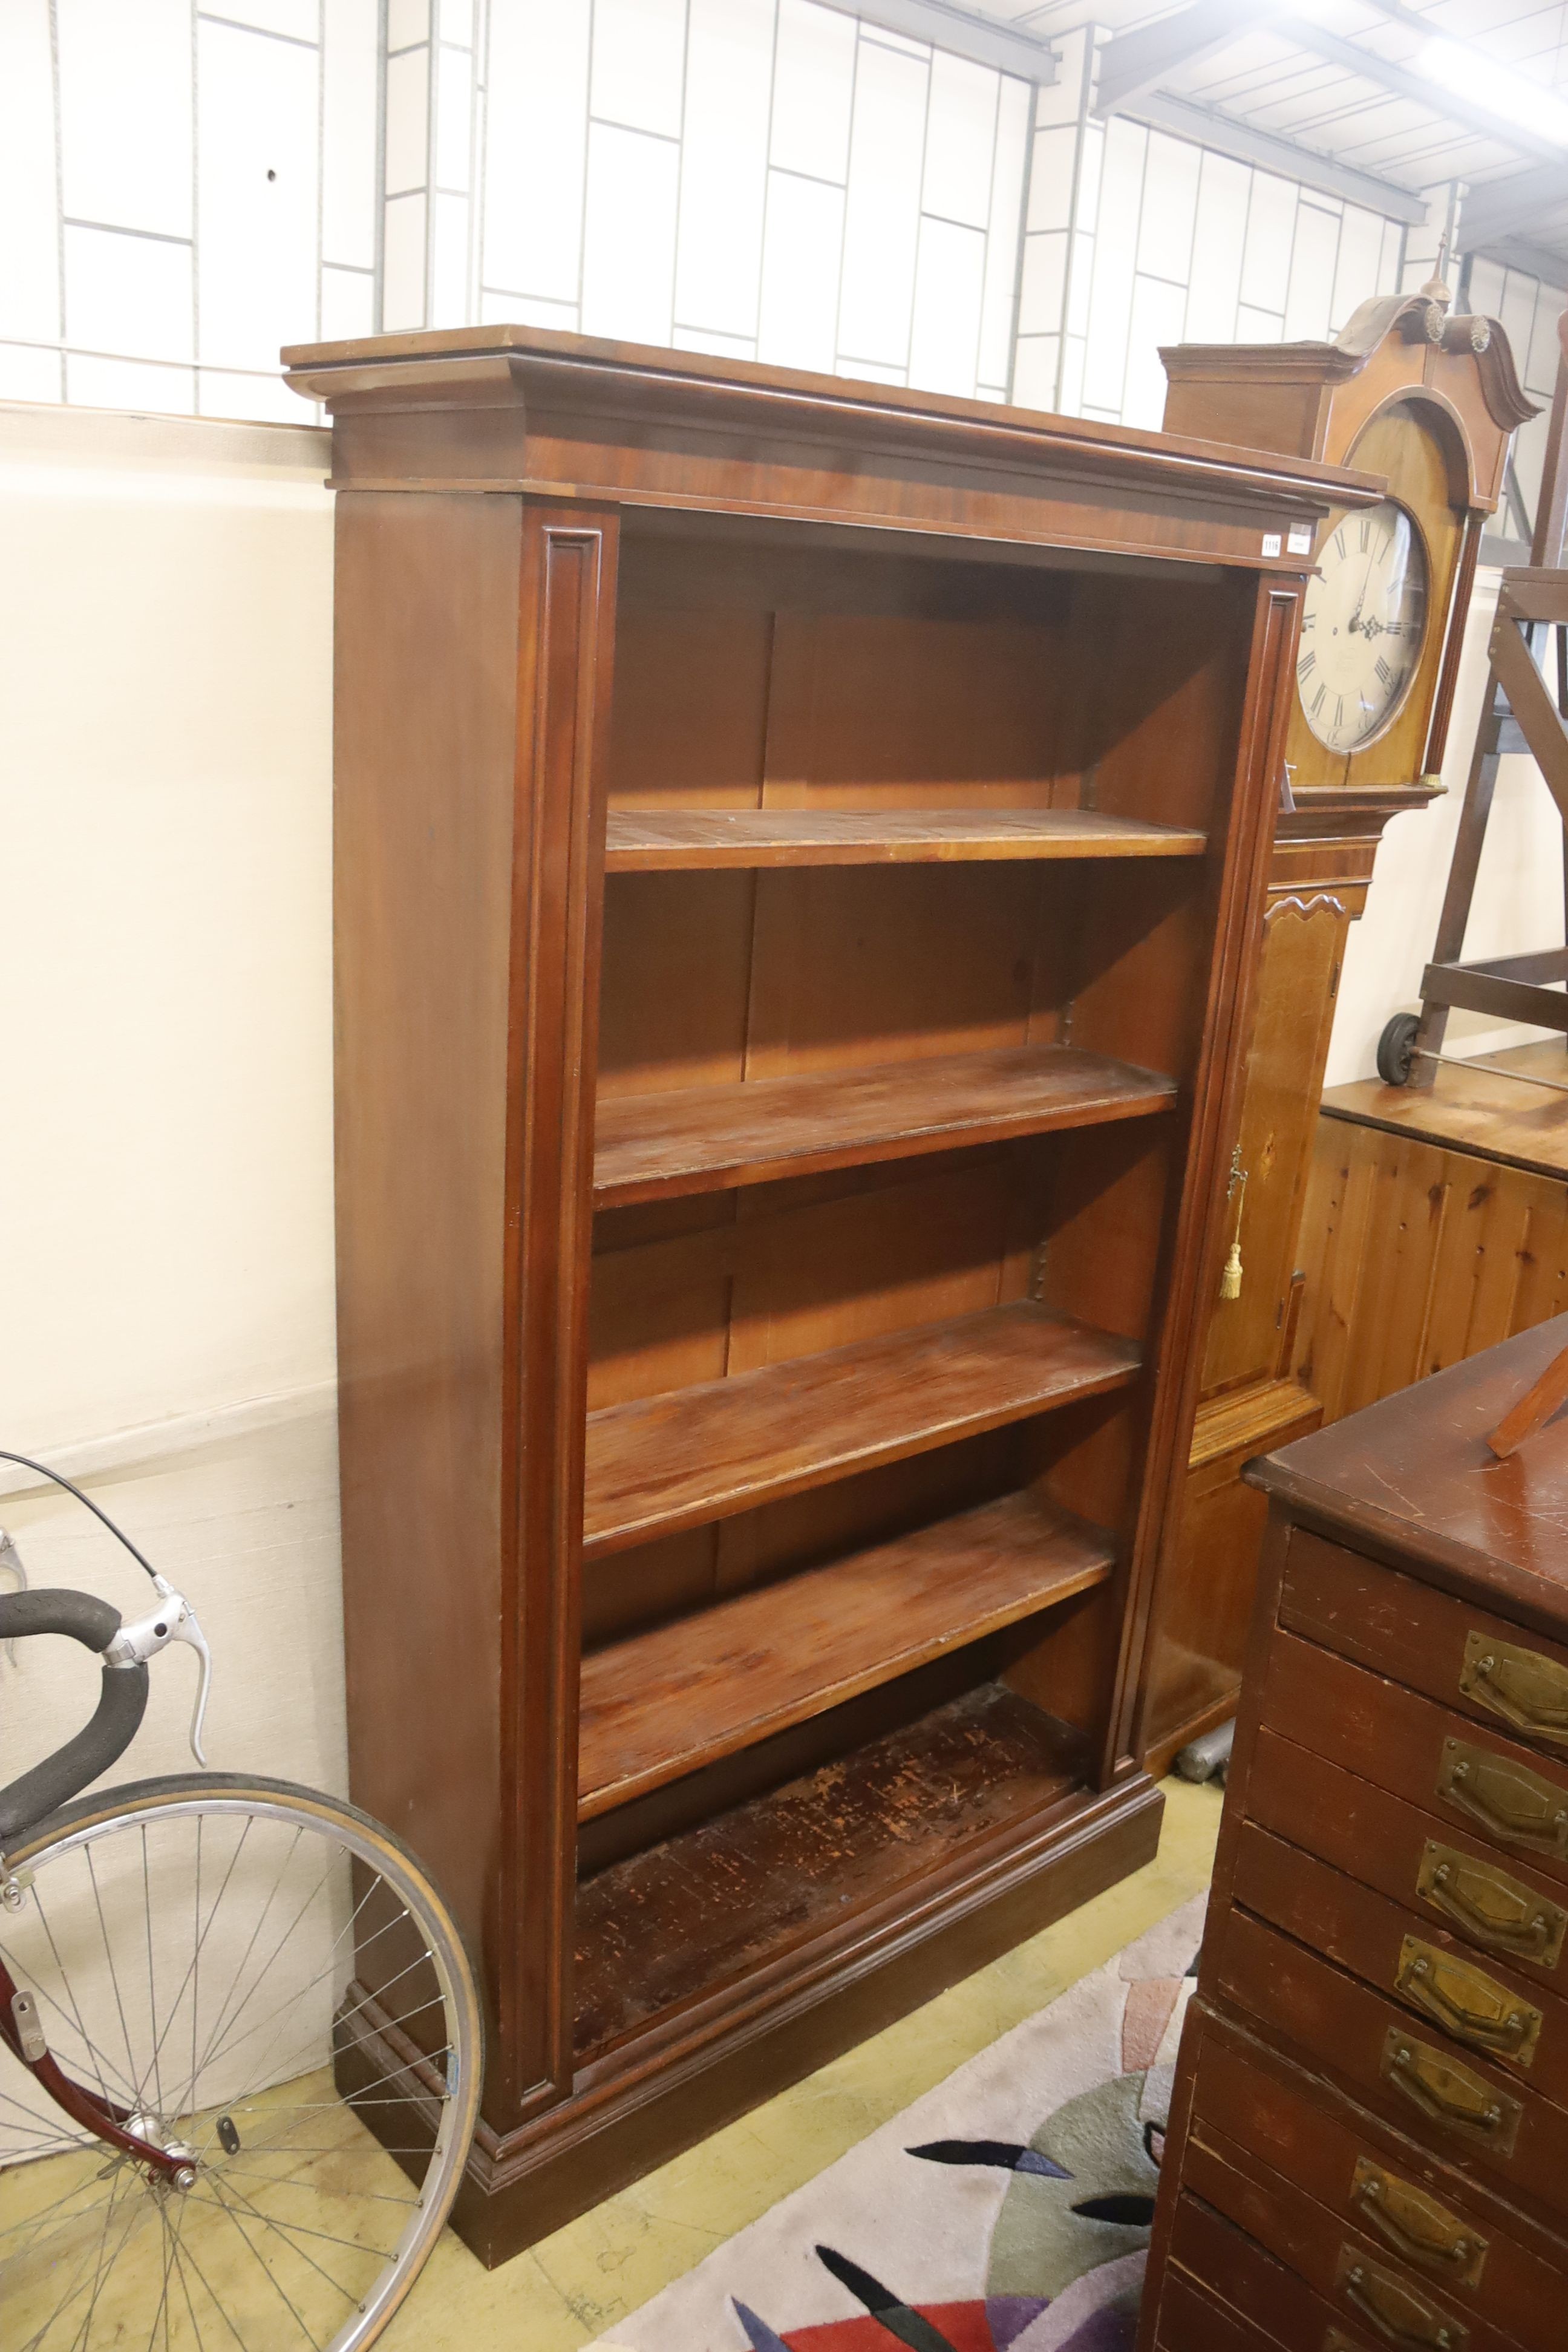 A large late Victorian mahogany open bookcase, length 118cm, depth 36cm, height 187cm